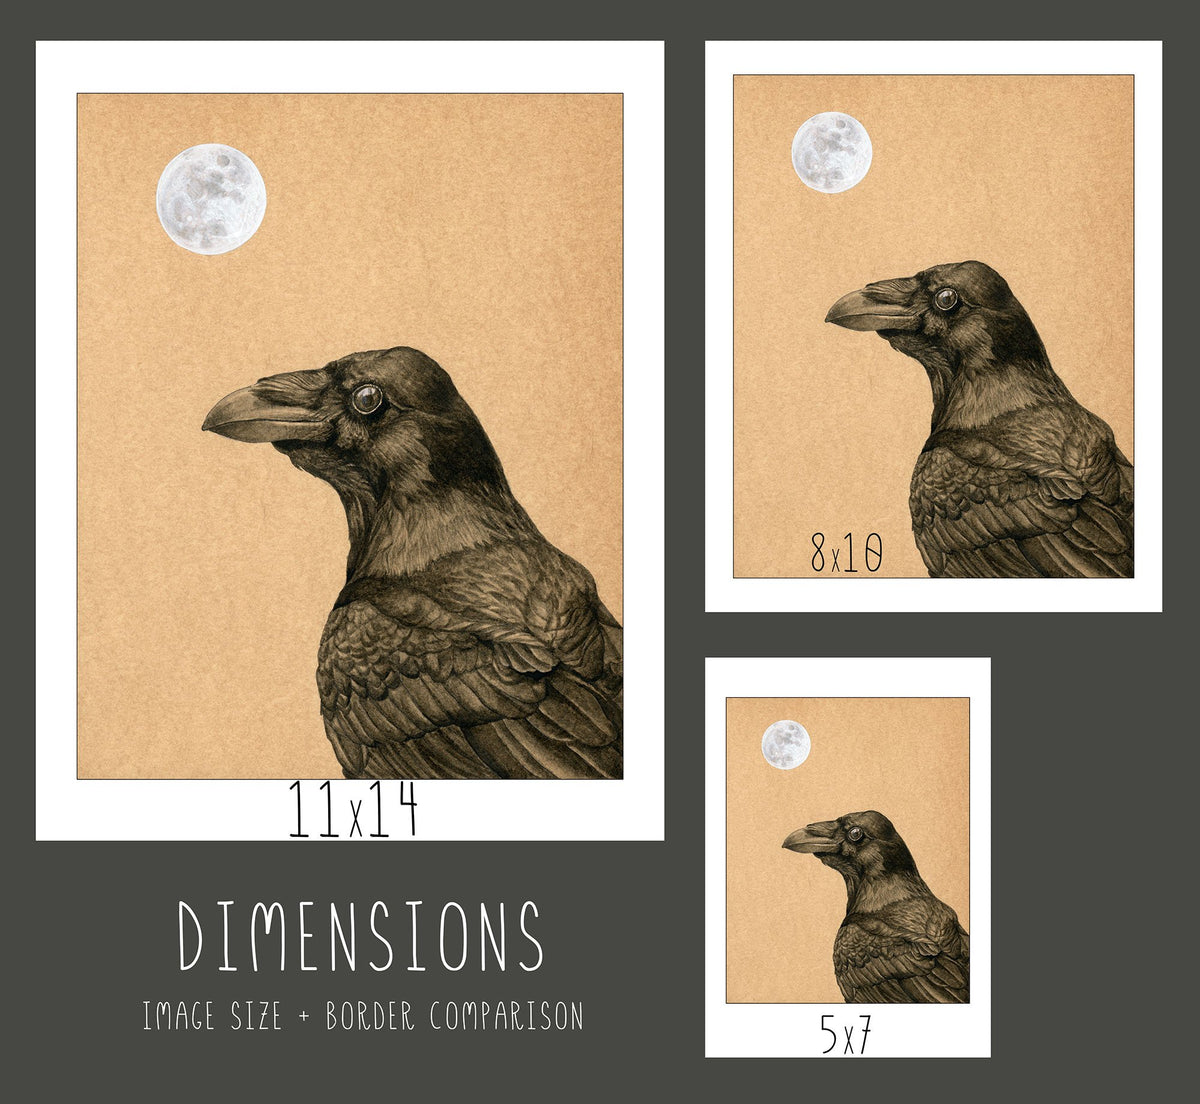 Raven and Moon Print - Wholesale